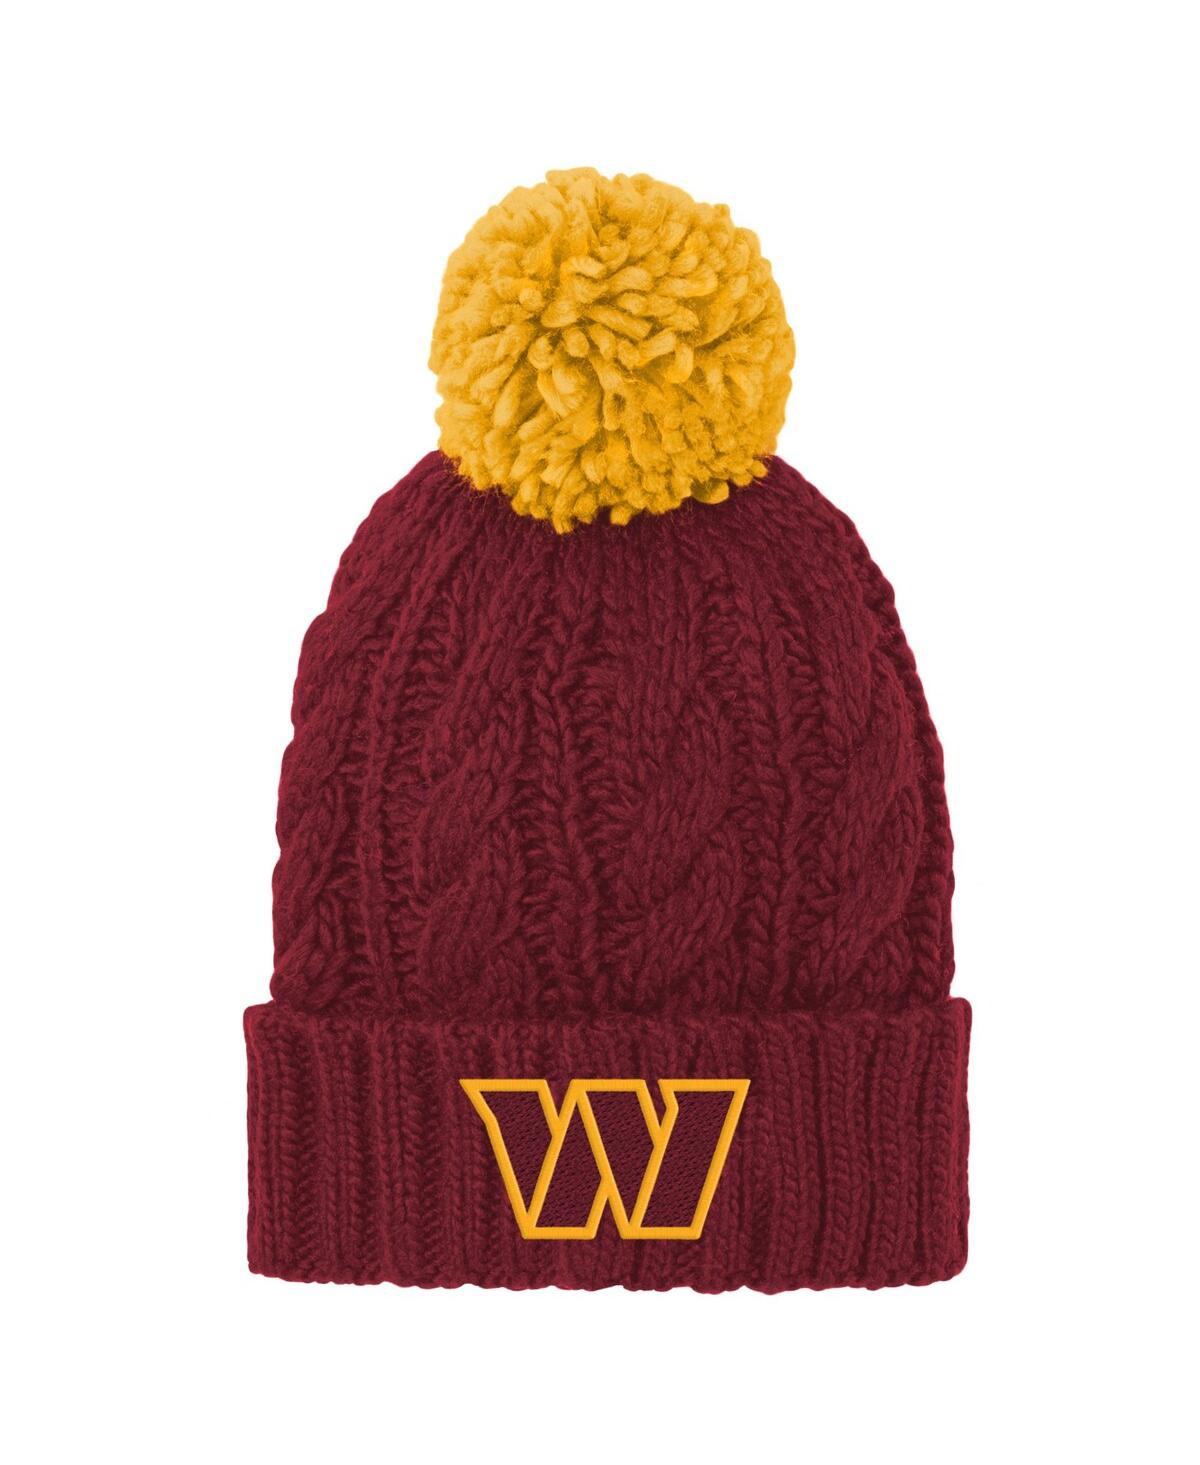 Outerstuff Kids' Big Girls Burgundy Washington Commanders Team Cable Cuffed Knit Hat With Pom